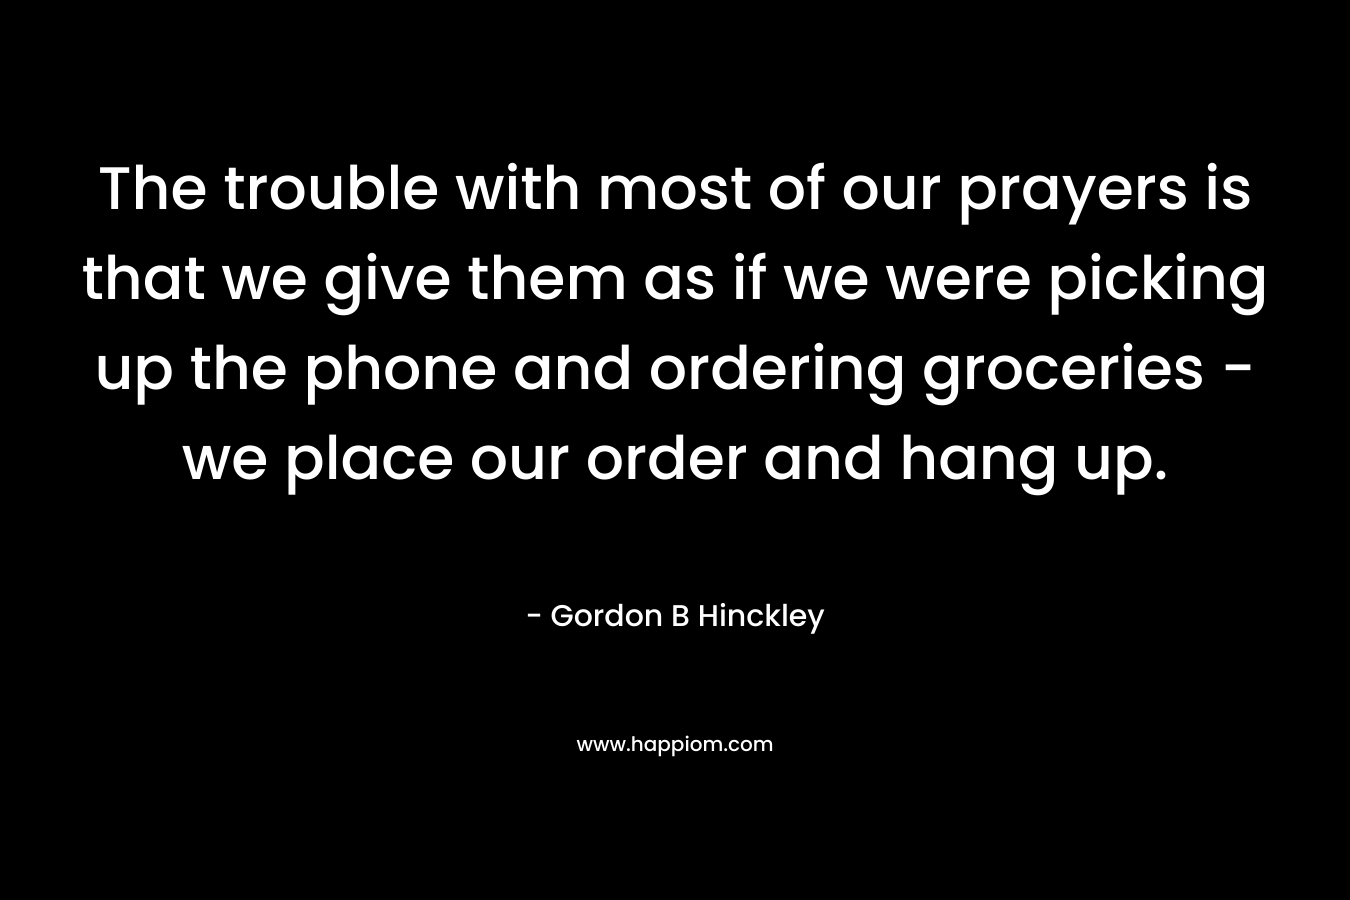 The trouble with most of our prayers is that we give them as if we were picking up the phone and ordering groceries - we place our order and hang up.